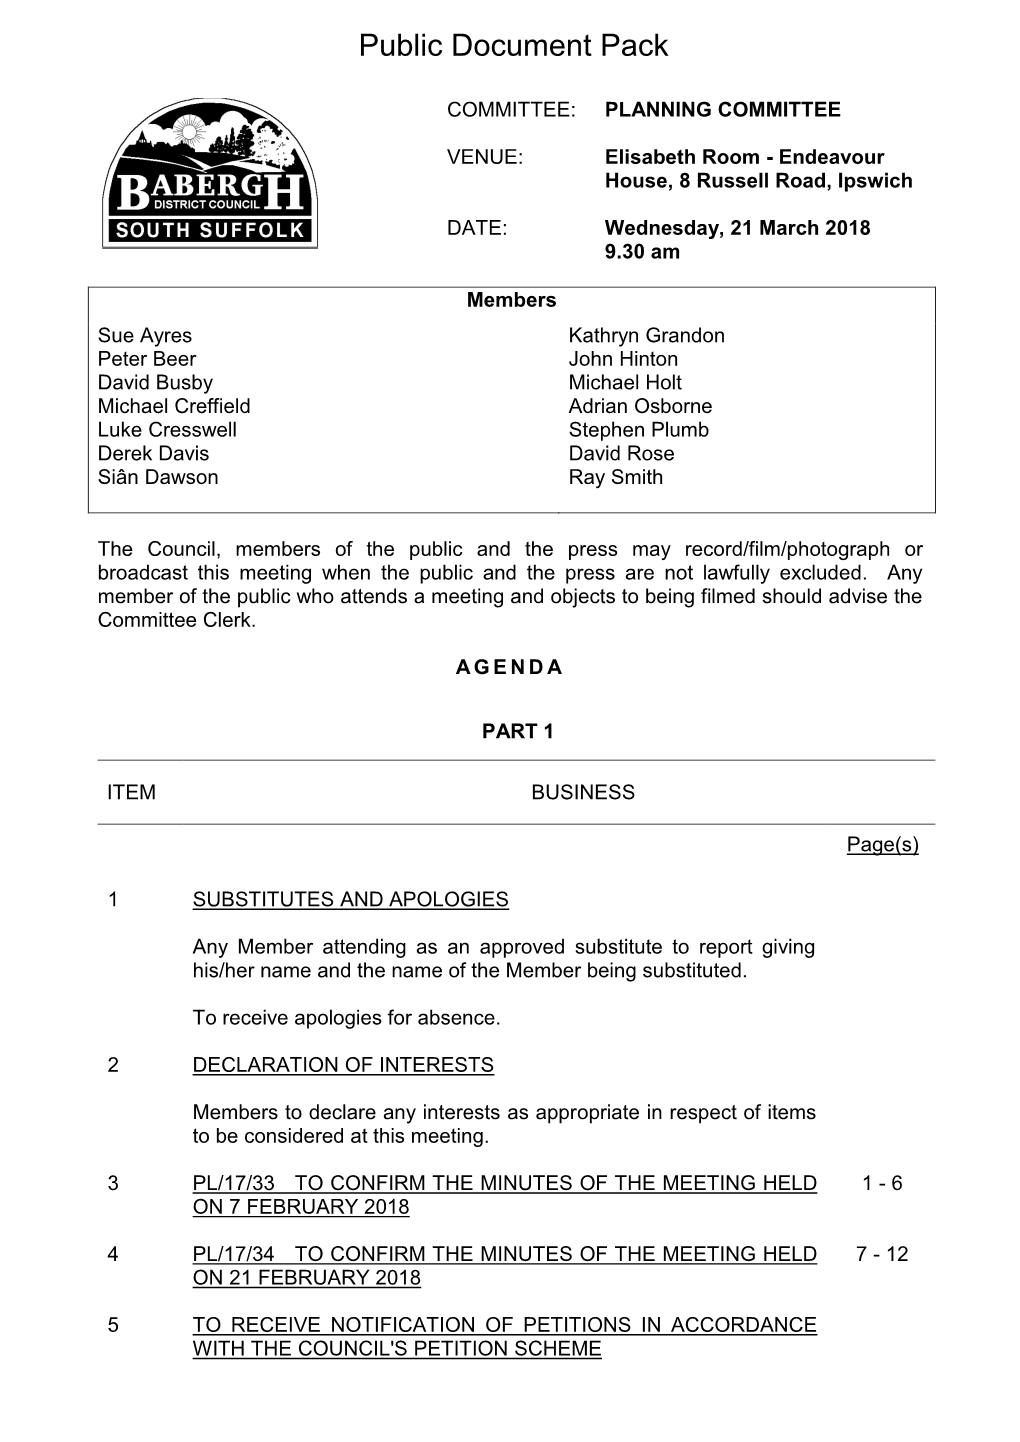 (Public Pack)Agenda Document for Babergh Planning Committee, 21